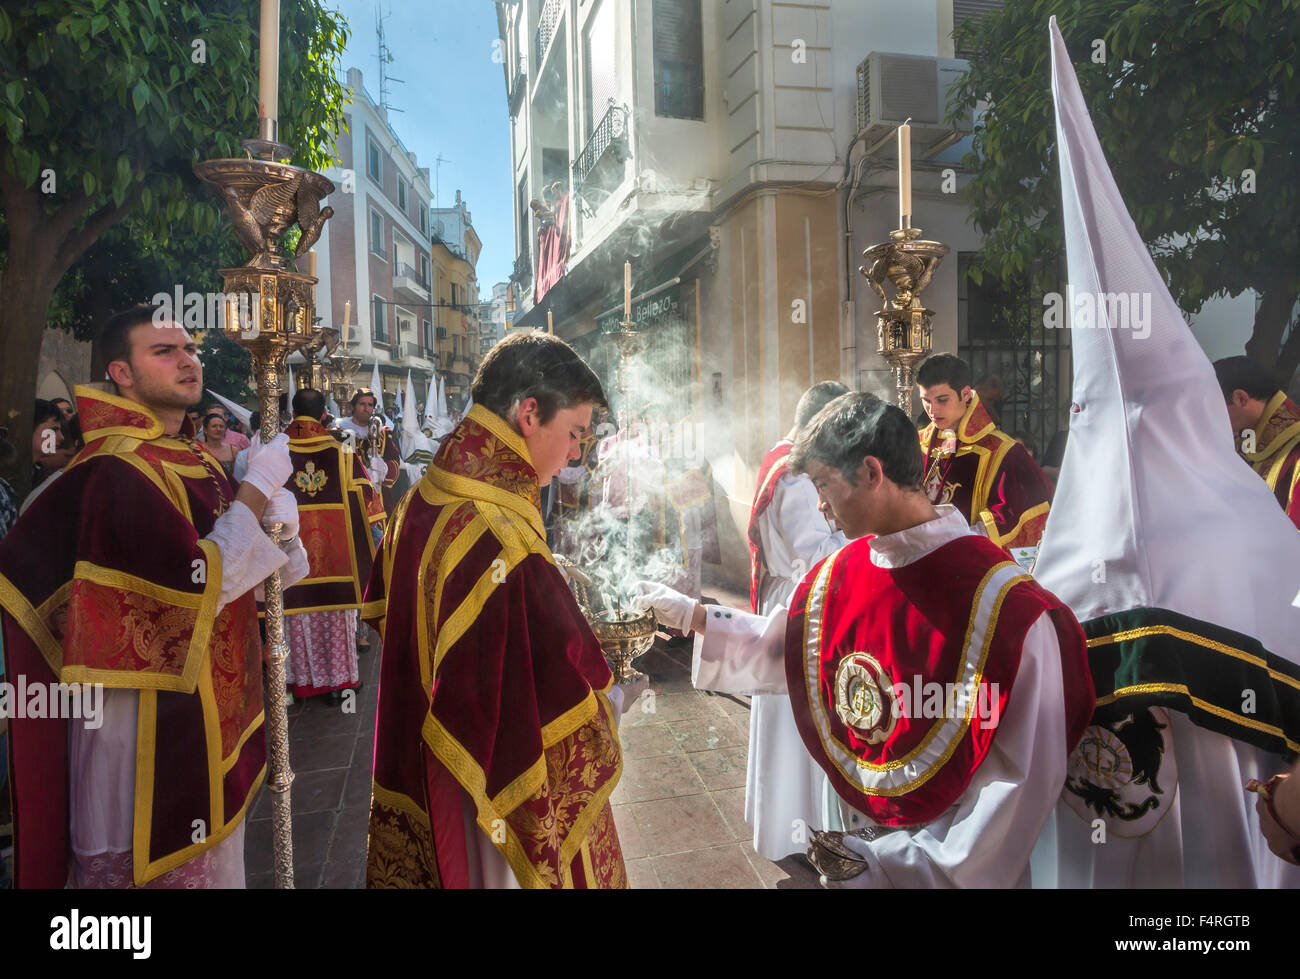 Andalusia, Cordoba, City, Holy week, Spain, Europe, Spring, celebration, colourful, incense, Parade, penitent, people, religion, Stock Photo